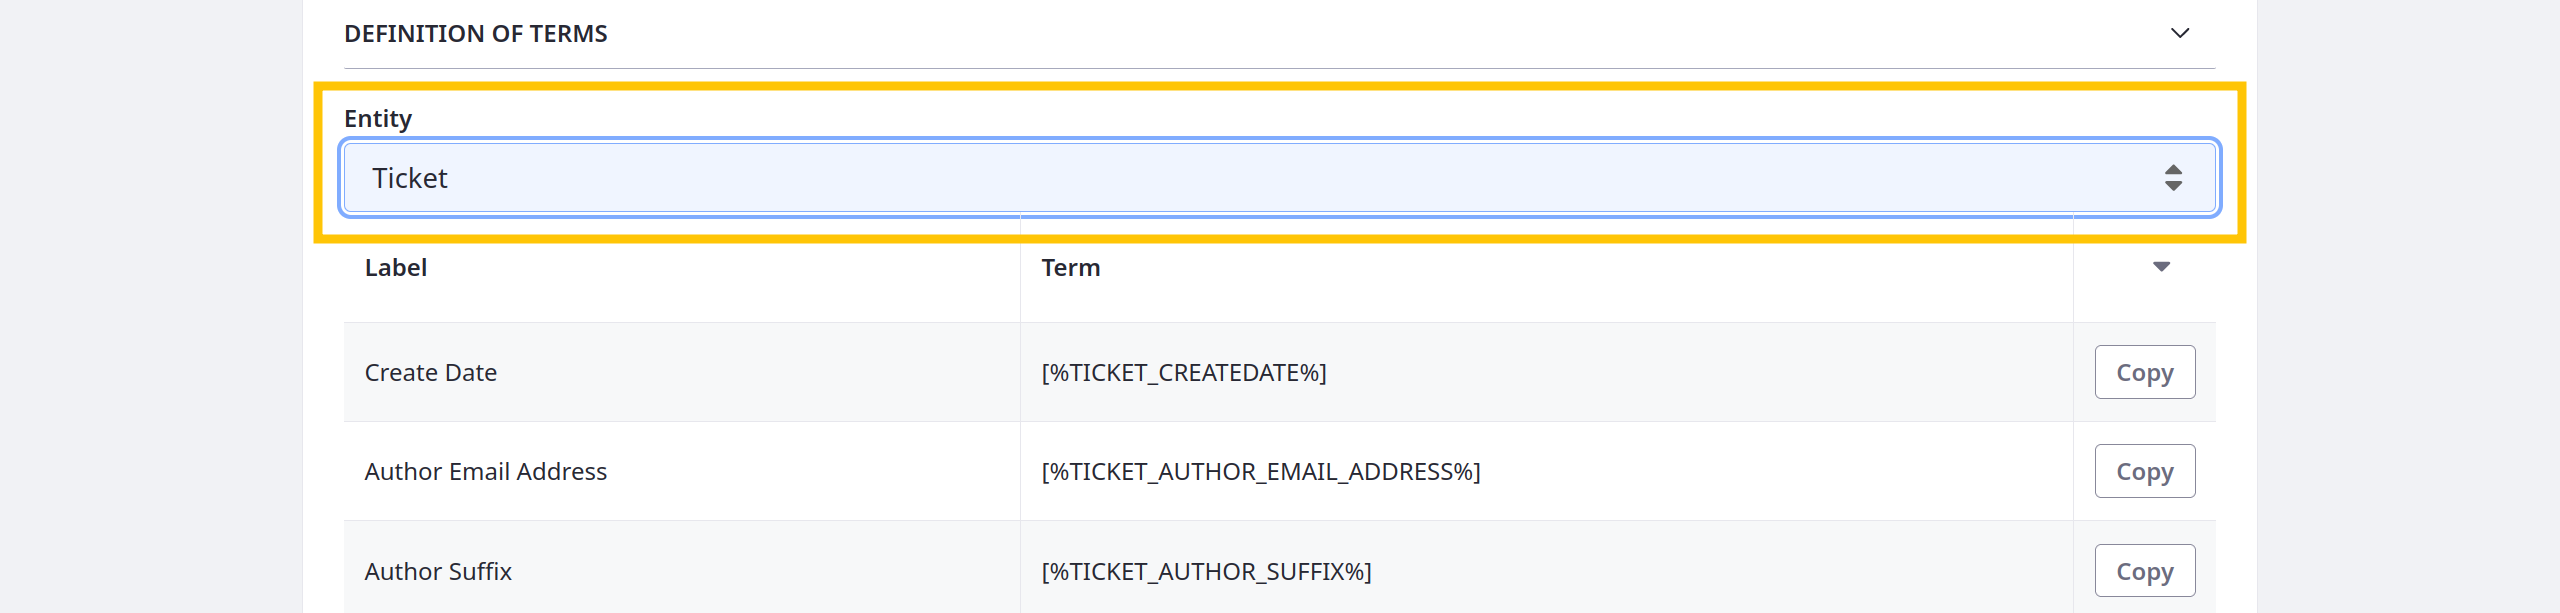 Search entities to add references to supported fields.